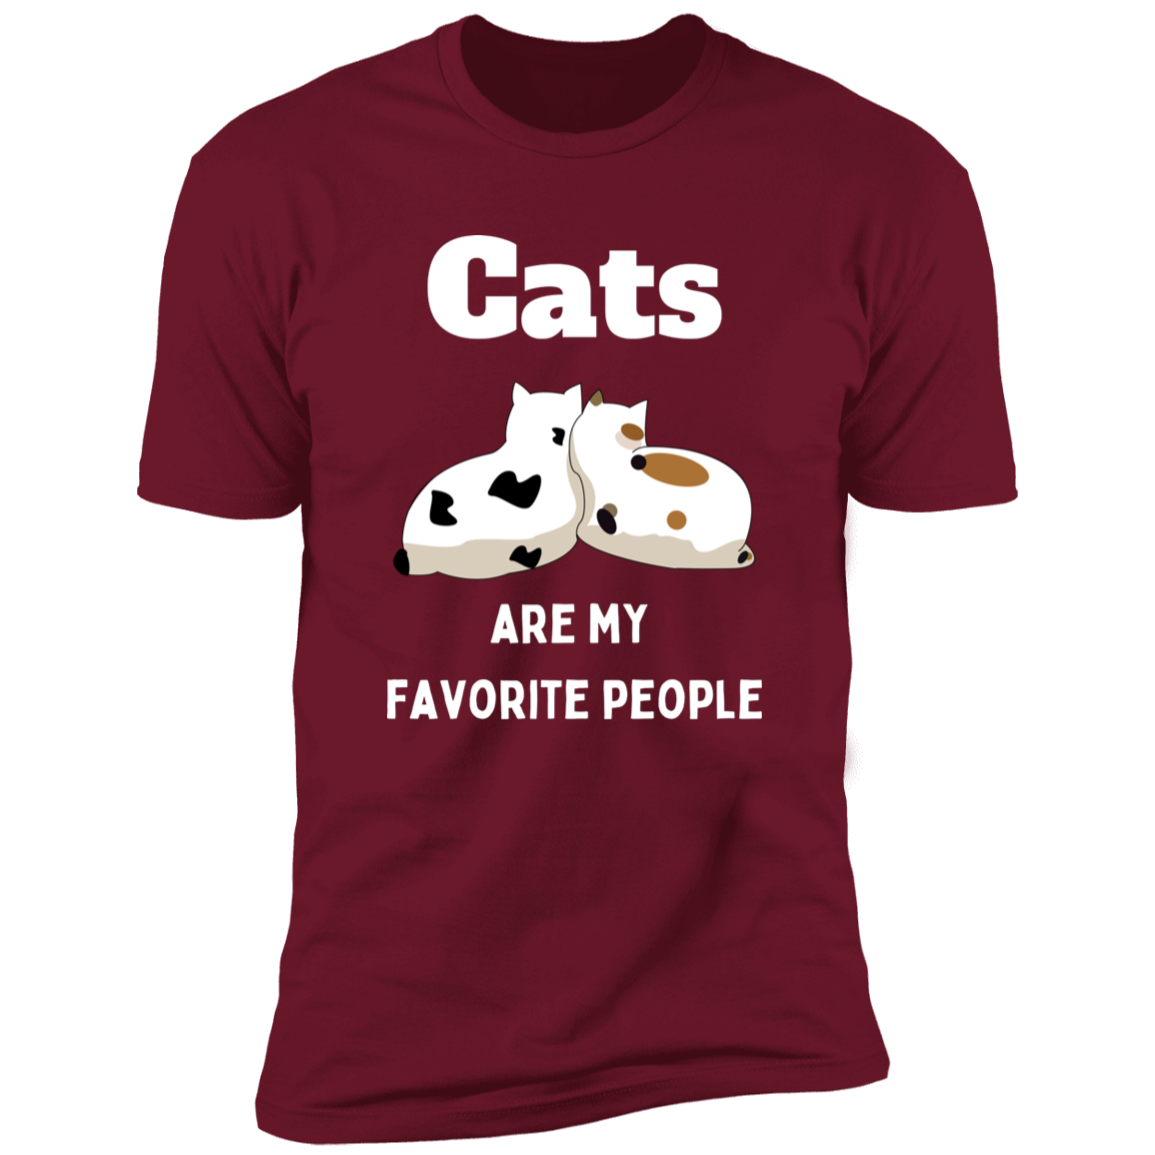 Cats Are My Favorite People T-shirt, Cat Shirt for humans, in cardinal redCats Are My Favorite People T-shirt, Cat Shirt for humans, in cardinal red